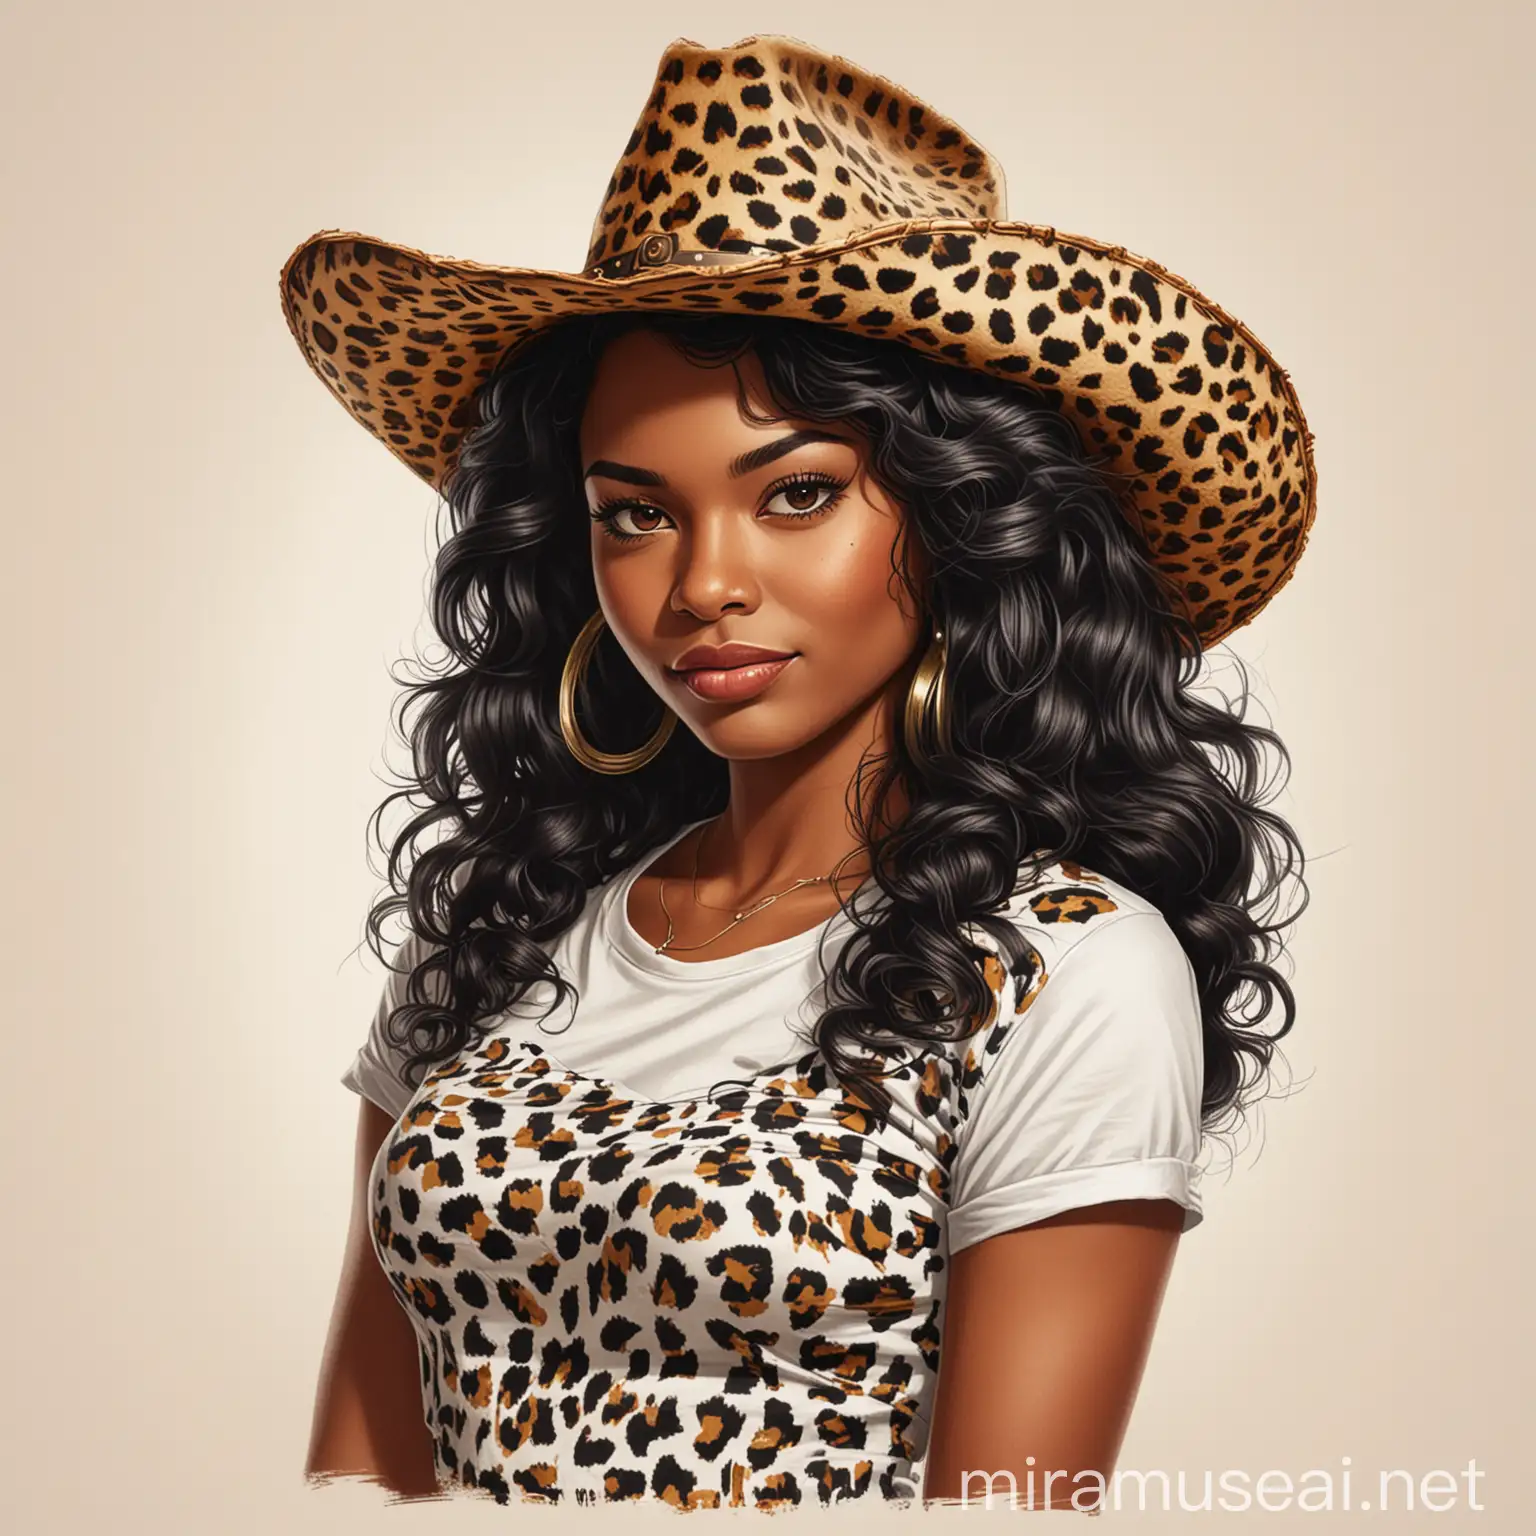 Retro African American Cowgirl Tipping Leopard Print Hat Illustration for TShirt